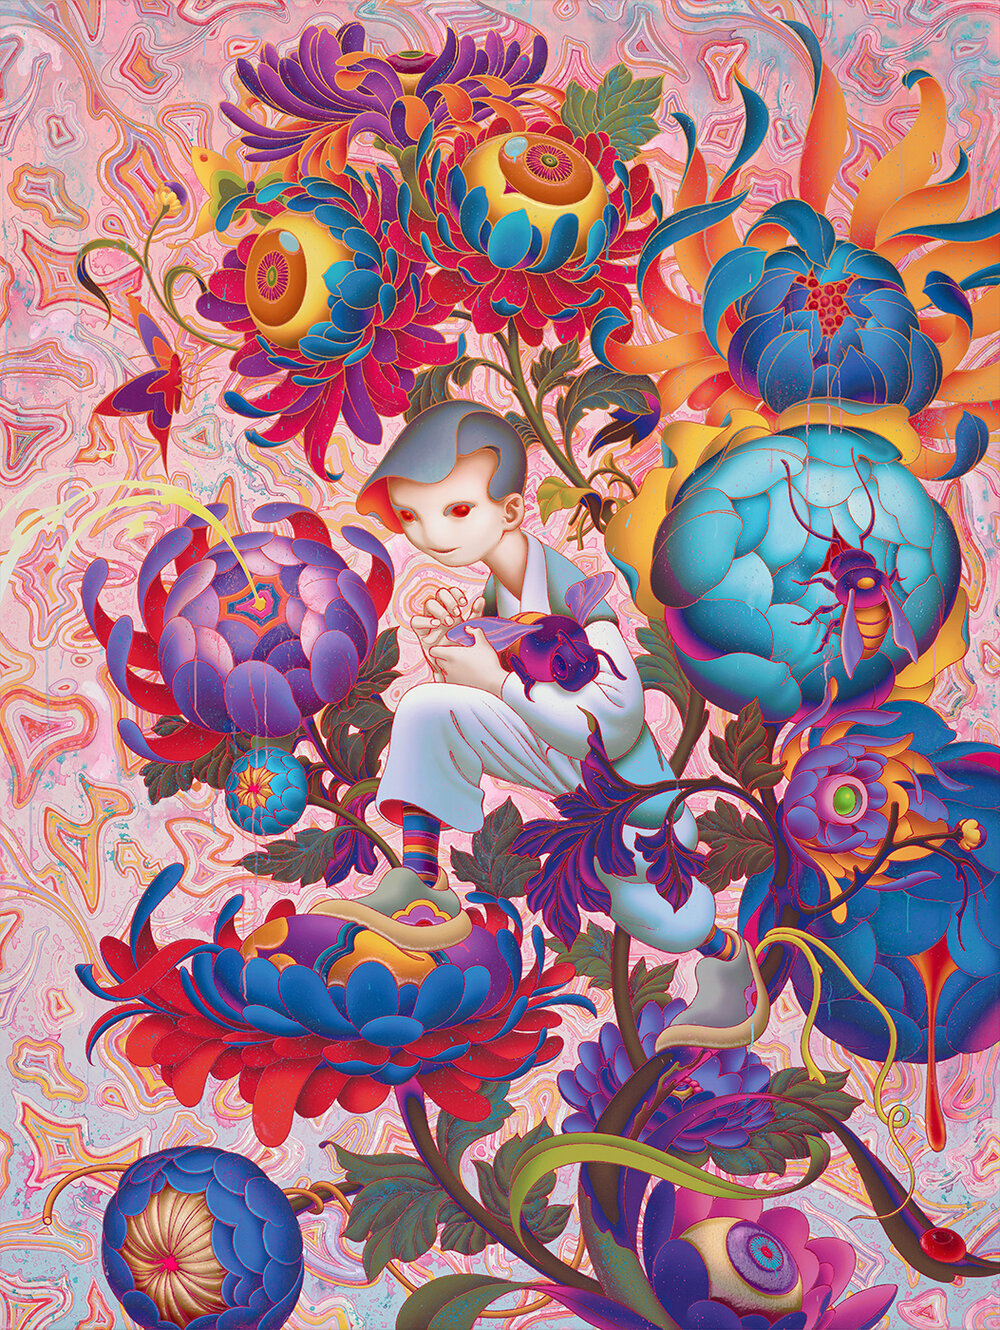 Narcissus Painting by James Jean for Jin (of BTS)